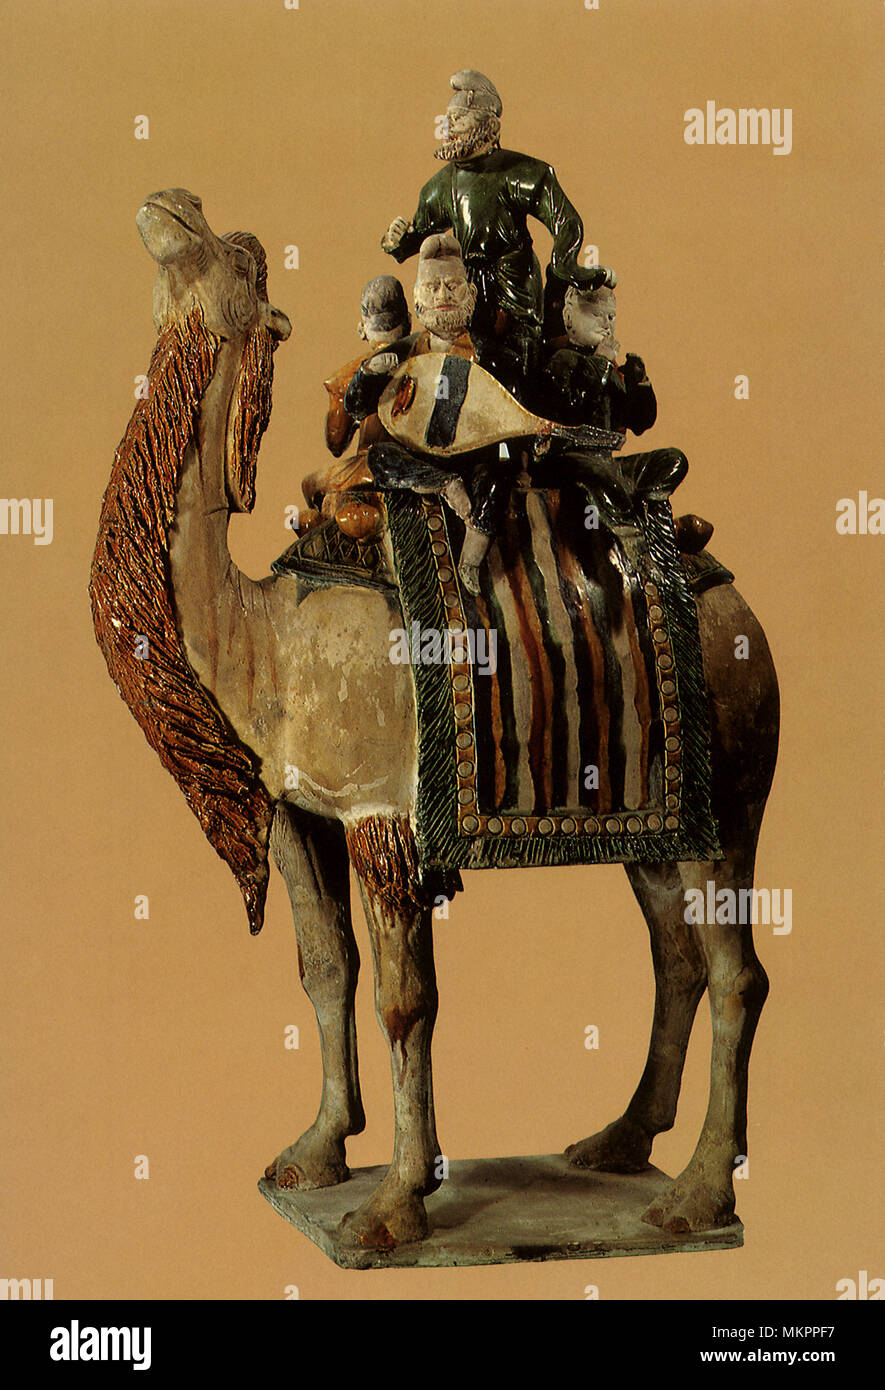 Statuette of Musicians Mounted on a Camel Stock Photo